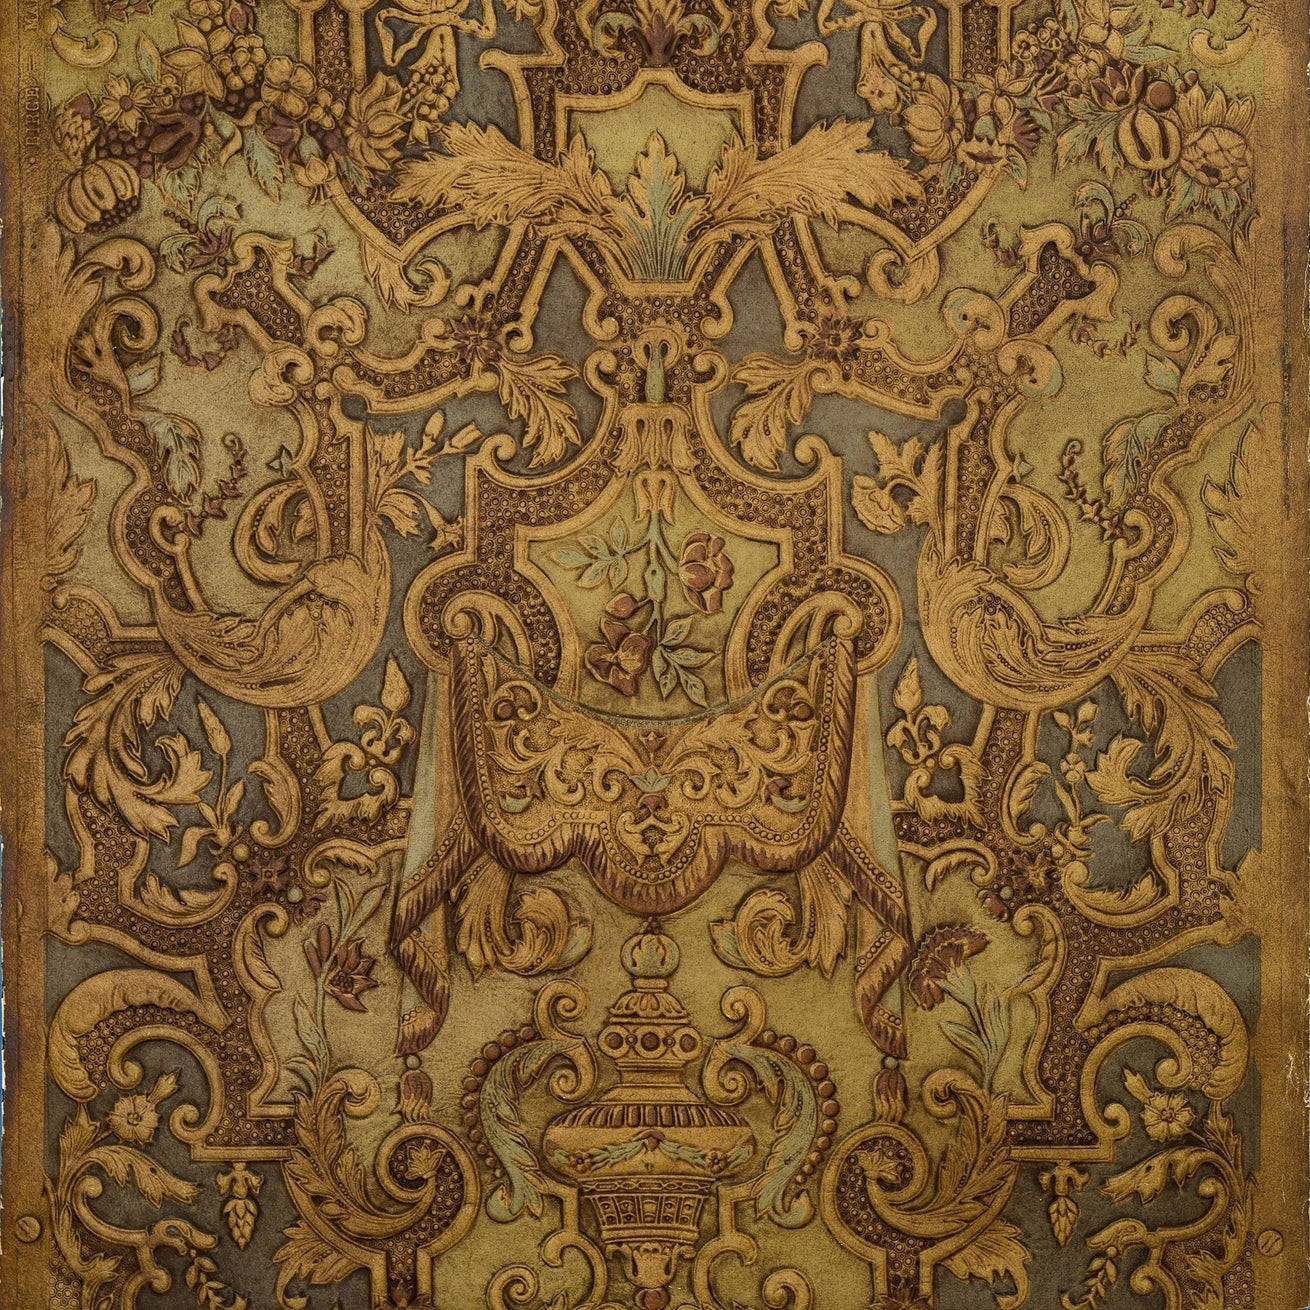 Spanish Embossed Leather - Antique Wallpaper Remnant